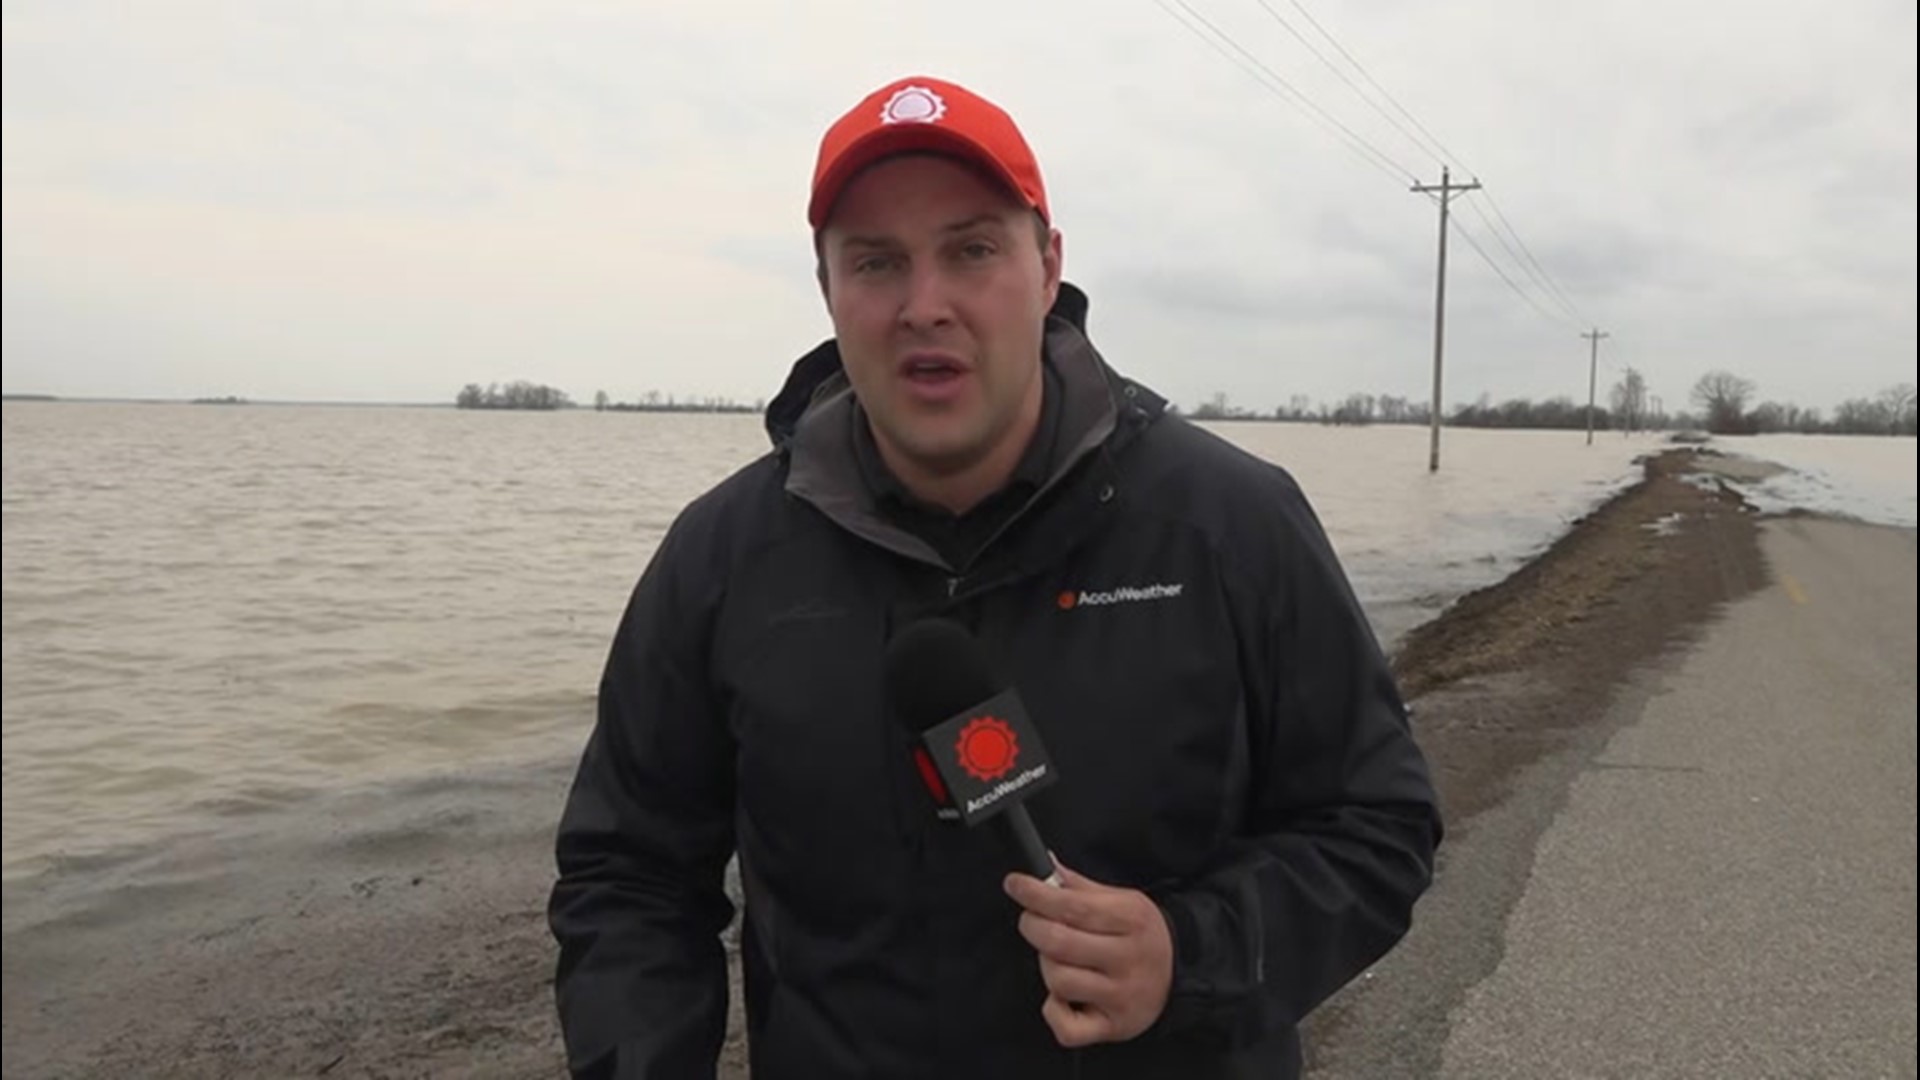 More than 180,000 acres of cropland are under water in Mississippi. Farmers say corn planting has been delayed due to recent rains. Bill Wadell joined us live from Rolling Fork, Mississippi, with more.